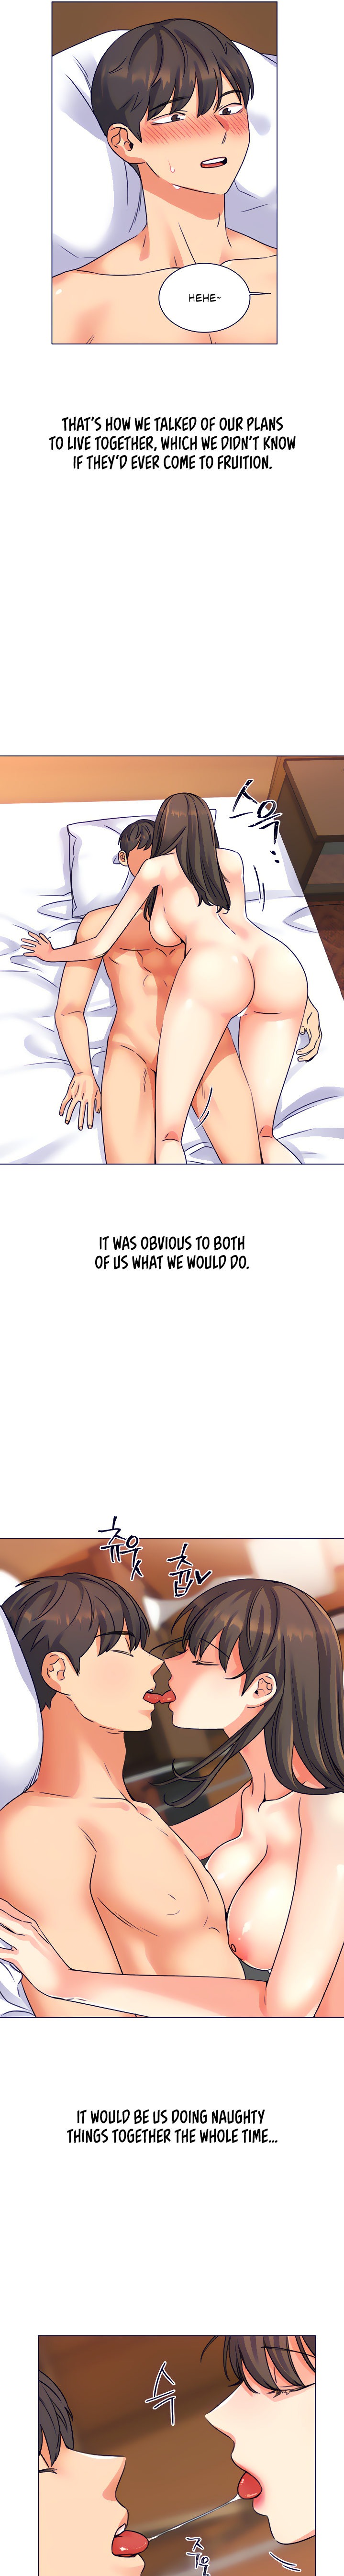 My girlfriend is so naughty Chapter 18 - Page 6